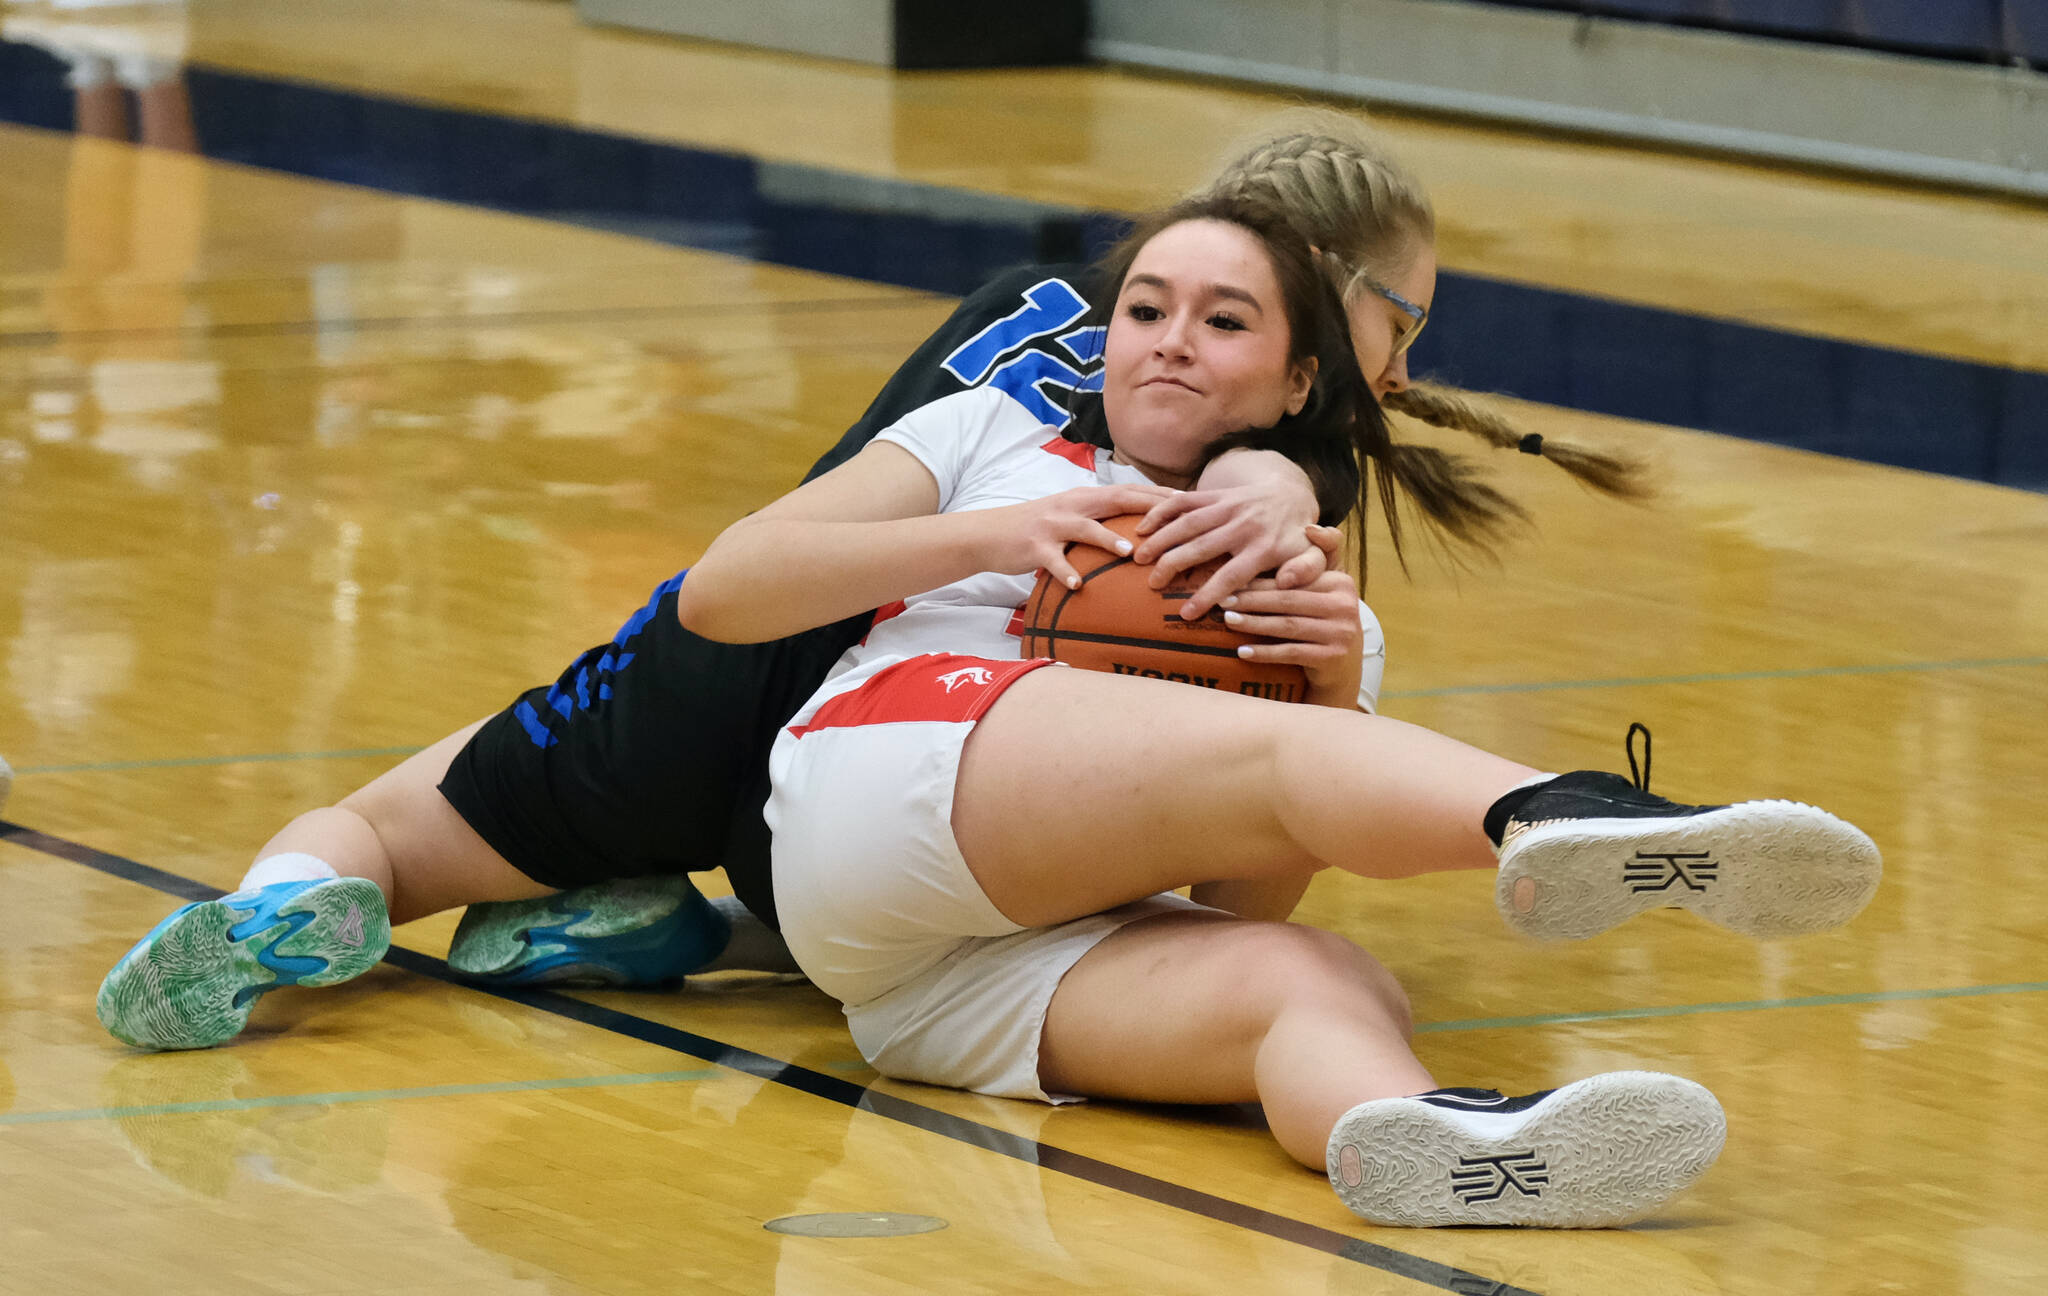 Wrangell High School junior Kayla Meissner (23) and Petersburg High School sophomore Eleanor Kandoll (12) battle for a loose ball during the Lady Wolves’ 48-10 win over the Lady Vikings in the Region V 2A/4A Basketball Tournament on Wednesday at Thunder Mountain High School in Juneau. (Klas Stolpe for the Juneau Empire)